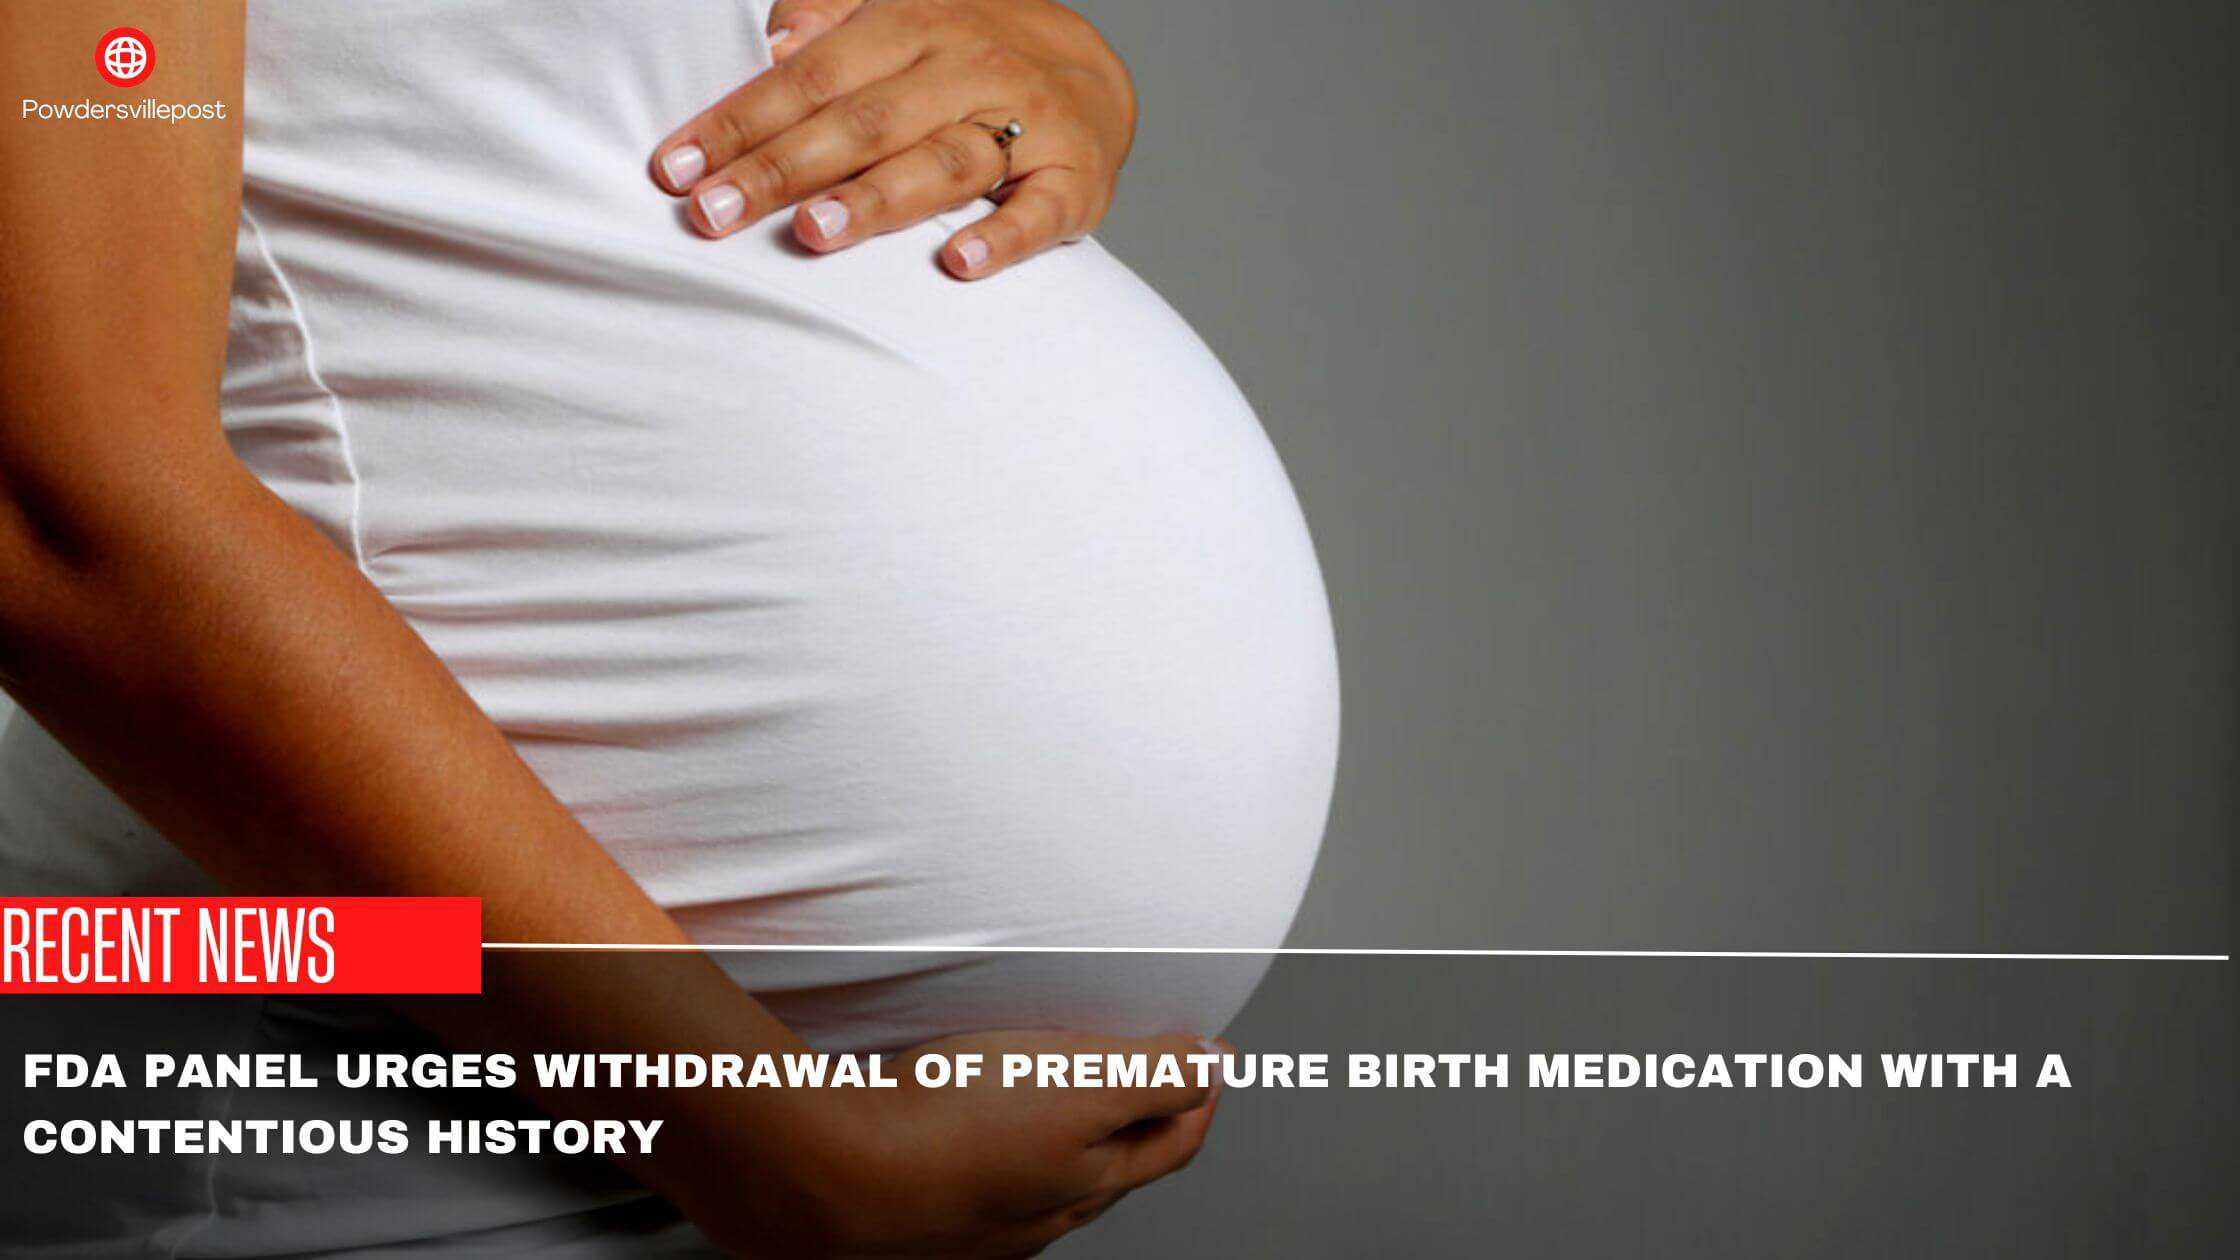 FDA Panel Urges Withdrawal Of Premature Birth Medication With A Contentious History